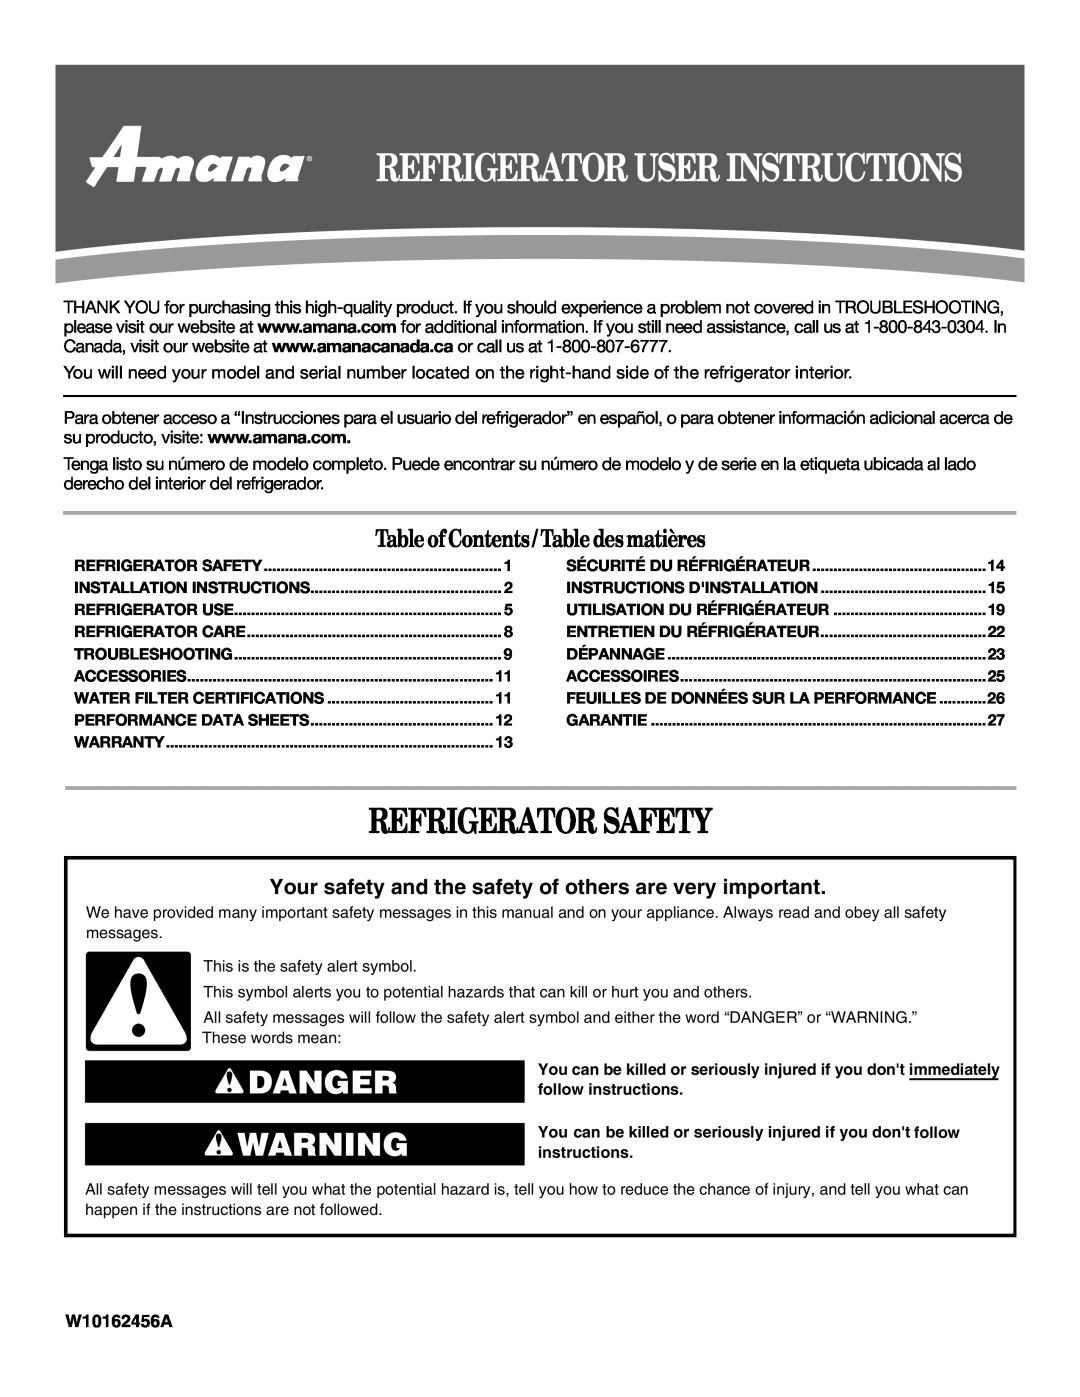 Amana T2RFWG2 installation instructions Refrigerator Safety, Danger, Table of Contents / Table desmatières, W10162456A 